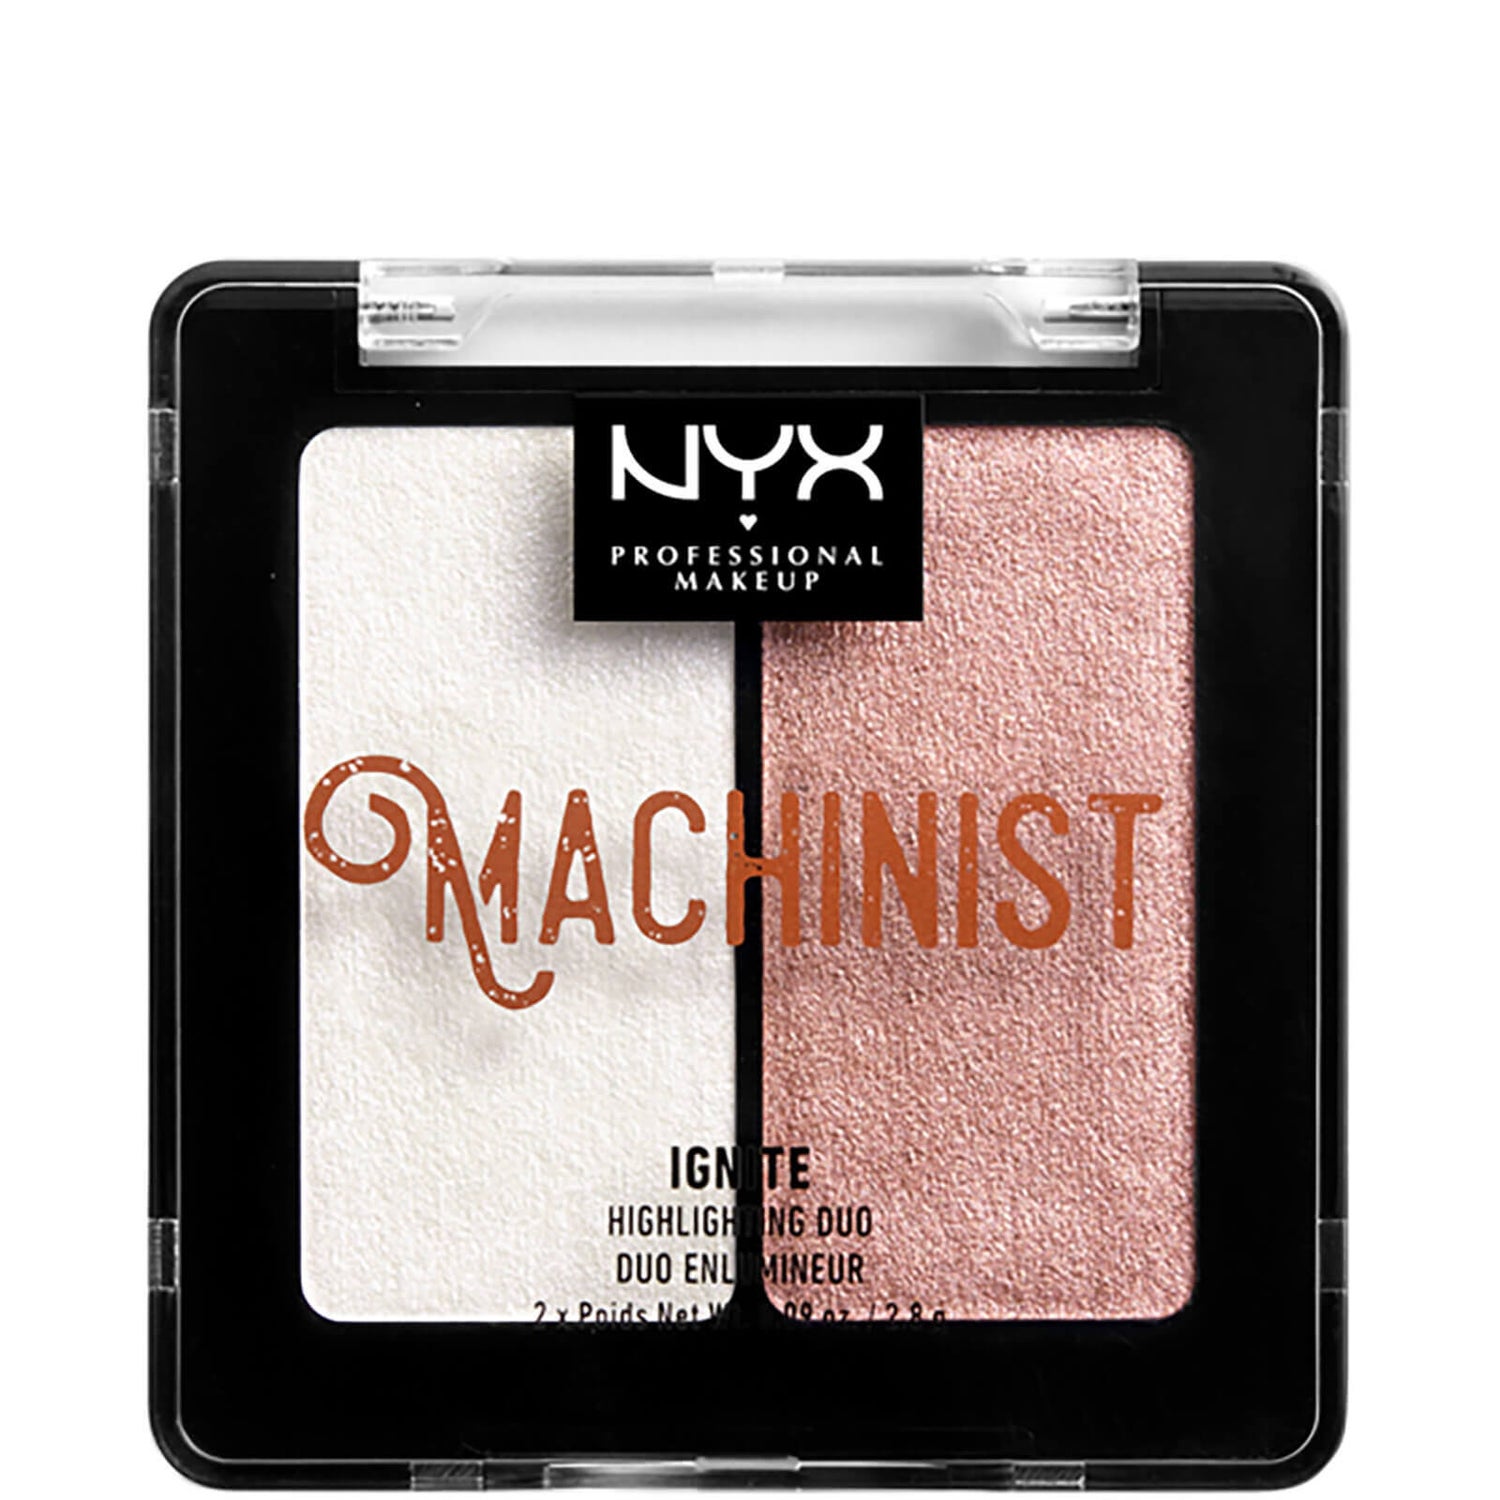 NYX Professional Makeup Machinist Highlighter Duo Kit – Ignite